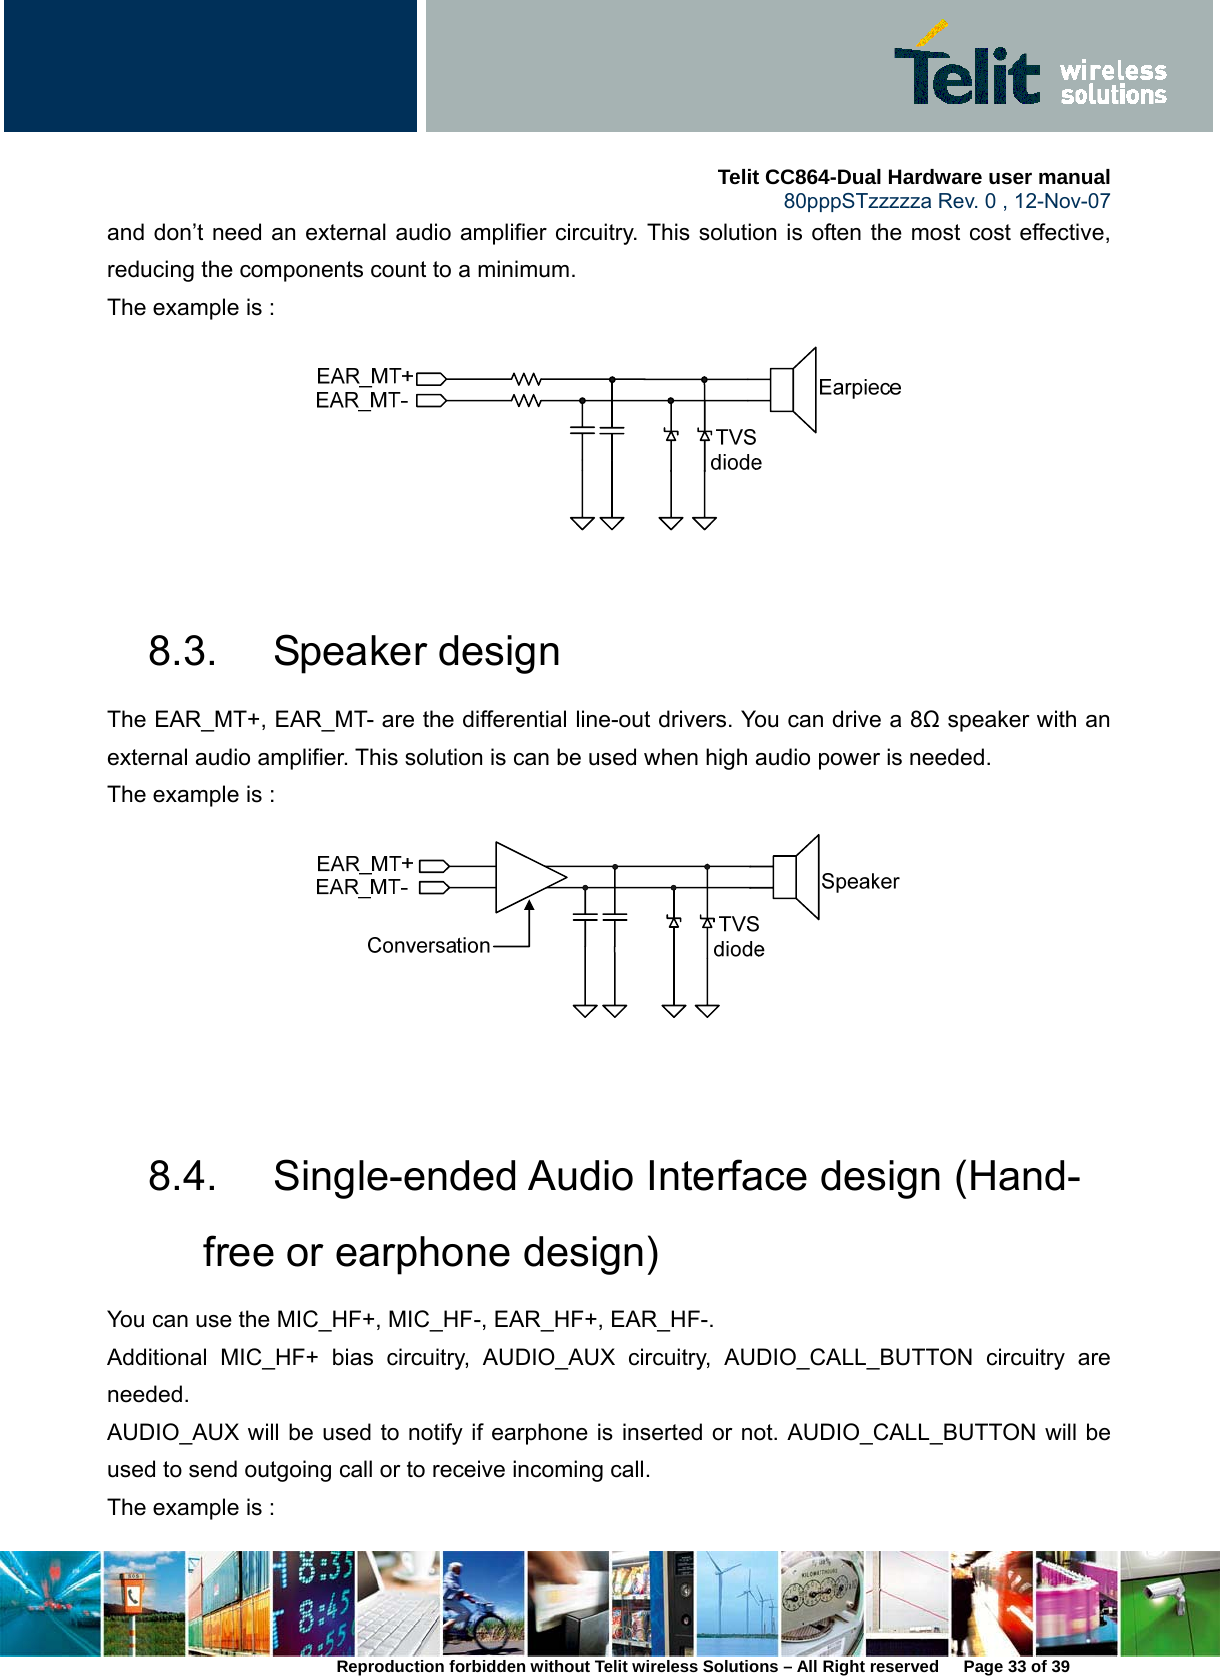     Telit CC864-Dual Hardware user manual   80pppSTzzzzza Rev. 0 , 12-Nov-07 Reproduction forbidden without Telit wireless Solutions – All Right reserved      Page 33 of 39 and don’t need an external audio amplifier circuitry. This solution is often the most cost effective, reducing the components count to a minimum. The example is :     8.3. Speaker design The EAR_MT+, EAR_MT- are the differential line-out drivers. You can drive a 8Ω speaker with an external audio amplifier. This solution is can be used when high audio power is needed. The example is :      8.4.  Single-ended Audio Interface design (Hand-free or earphone design) You can use the MIC_HF+, MIC_HF-, EAR_HF+, EAR_HF-.   Additional MIC_HF+ bias circuitry, AUDIO_AUX circuitry, AUDIO_CALL_BUTTON circuitry are needed.  AUDIO_AUX will be used to notify if earphone is inserted or not. AUDIO_CALL_BUTTON will be used to send outgoing call or to receive incoming call.   The example is :   